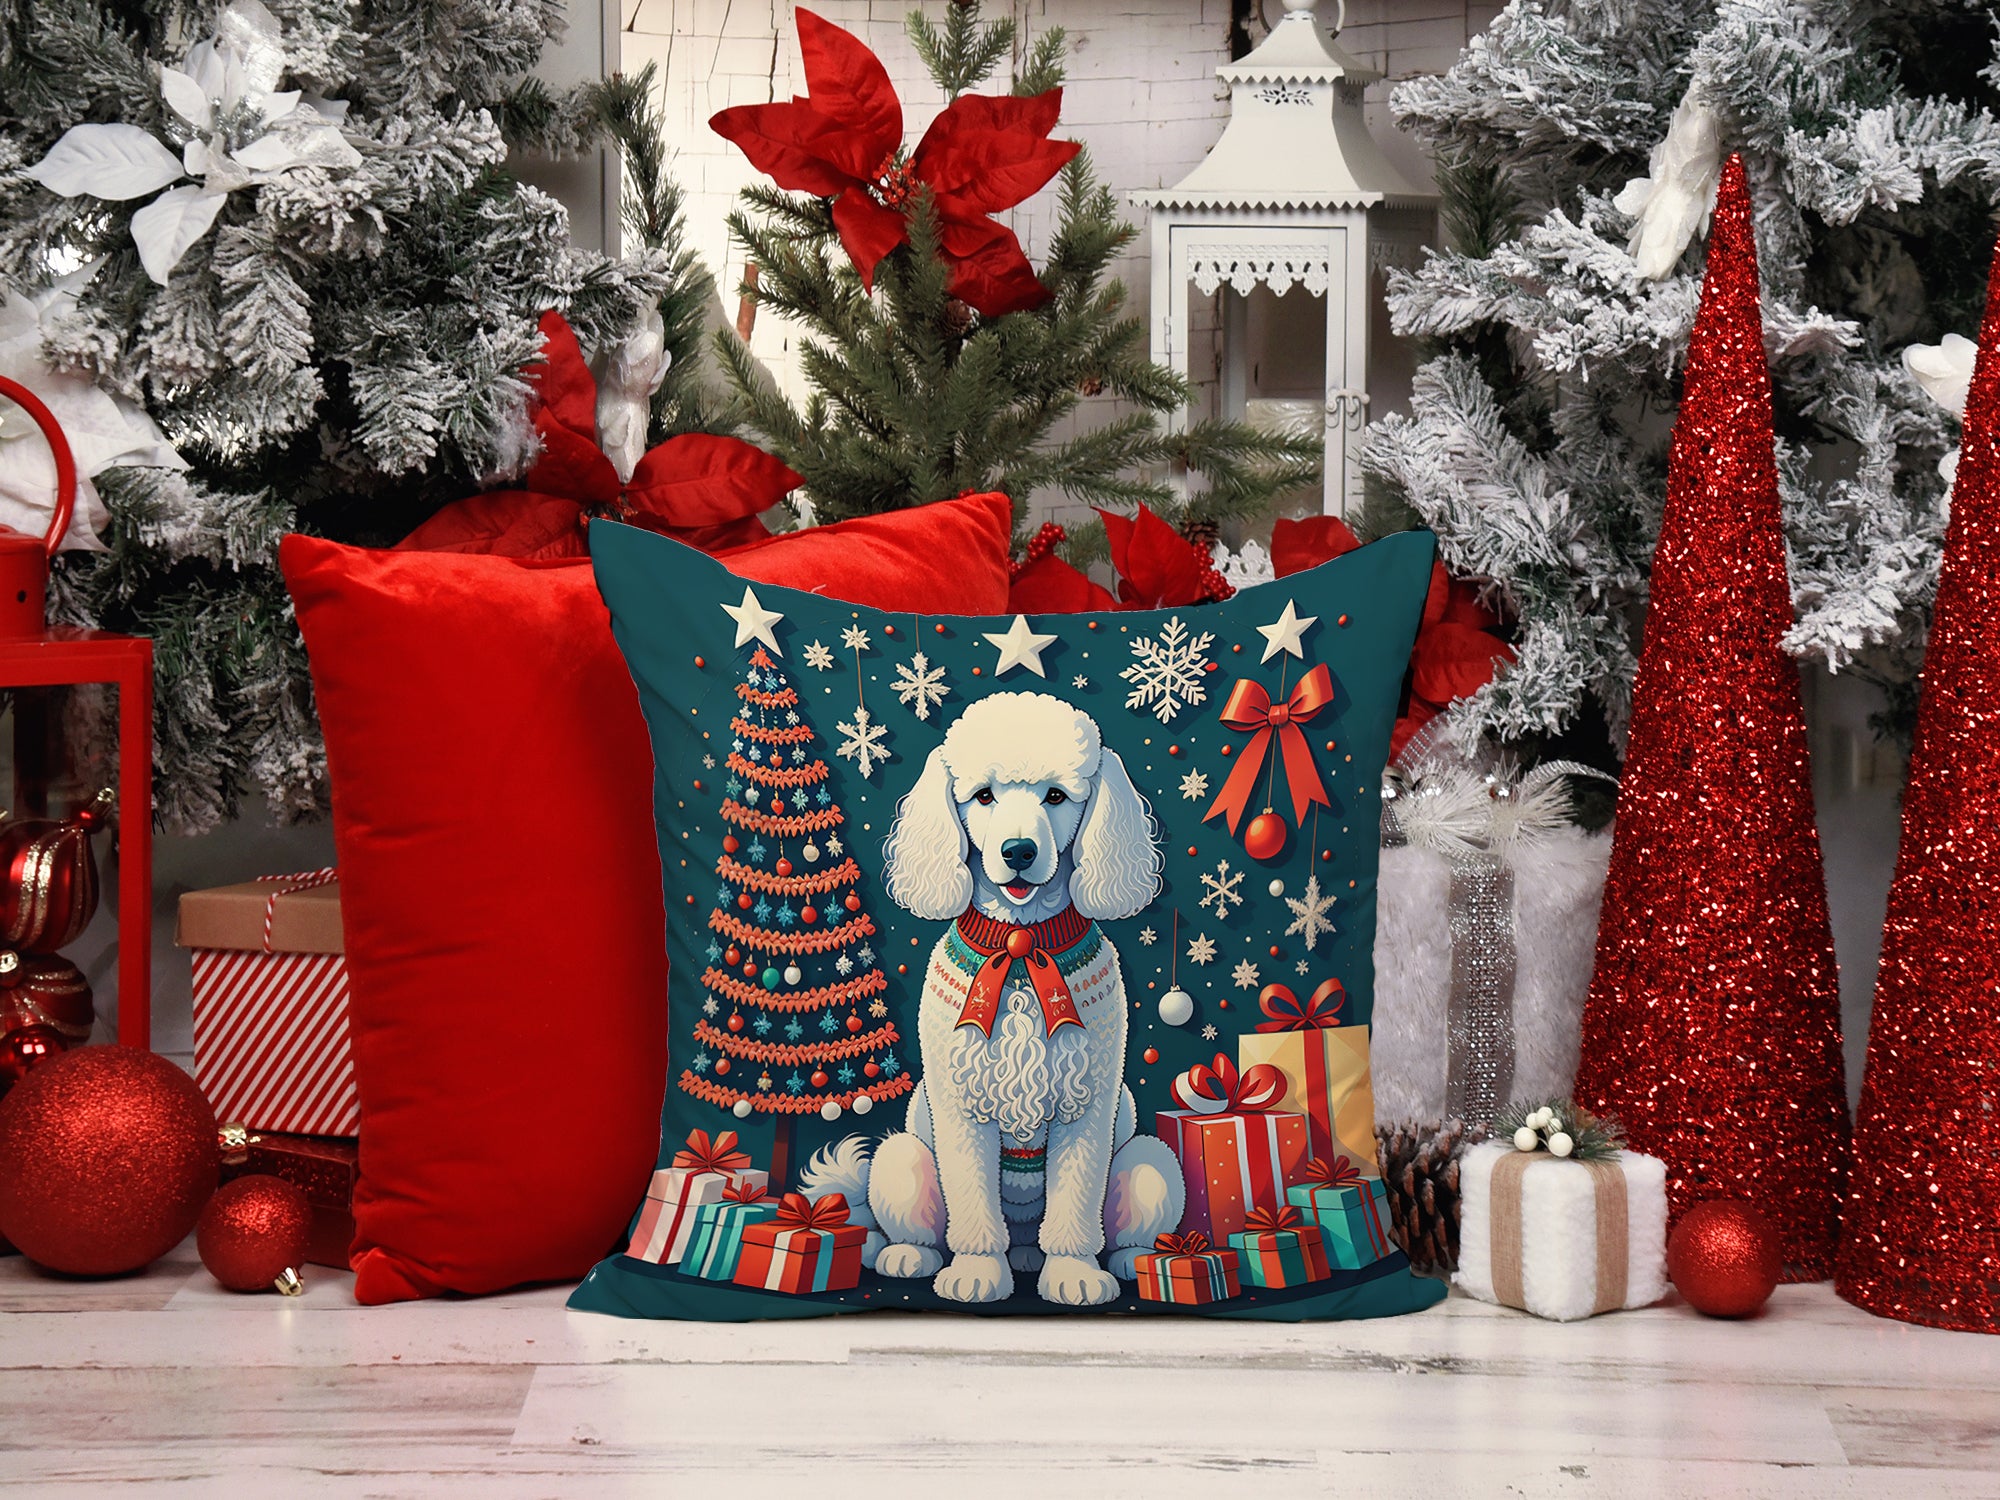 Buy this White Poodle Christmas Fabric Decorative Pillow